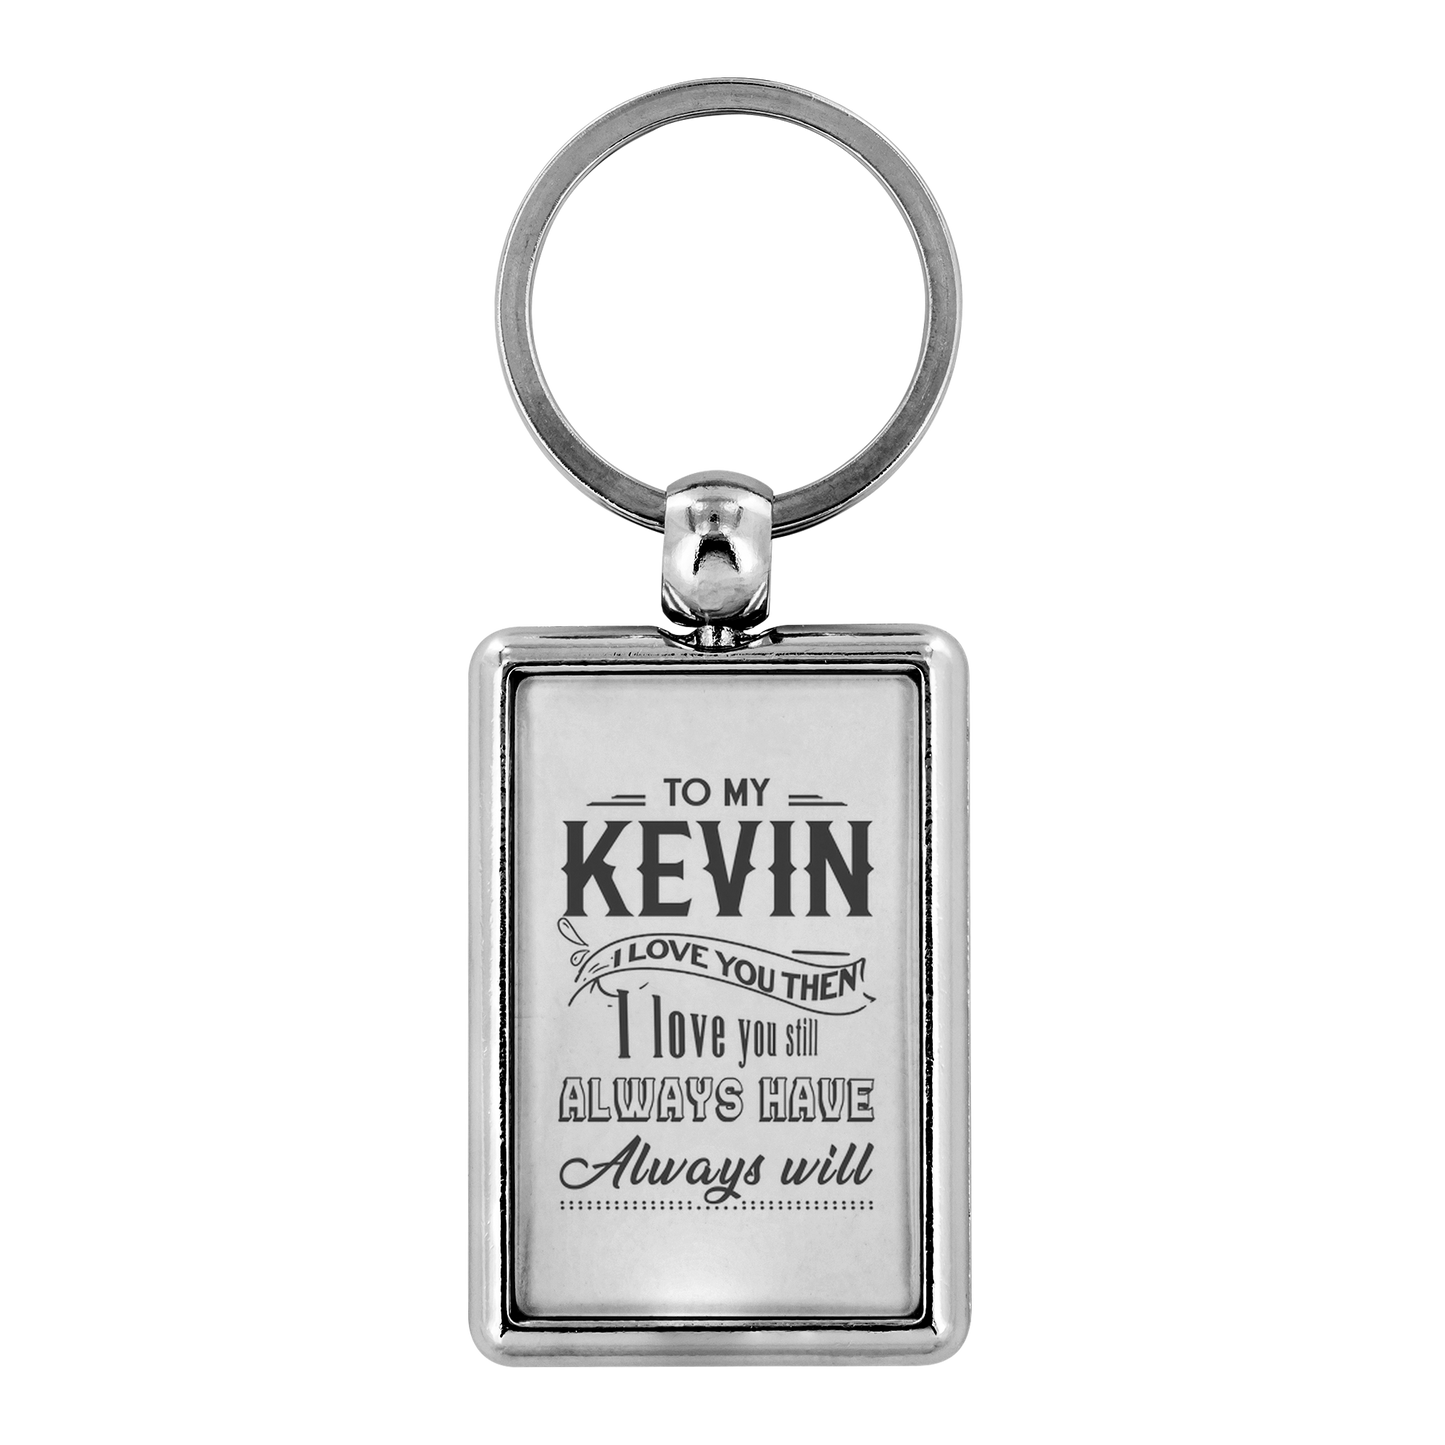 KC-21244630-sp-22118 - Keychain For Boyfriend With Name Kevin - To My Kevin I Love